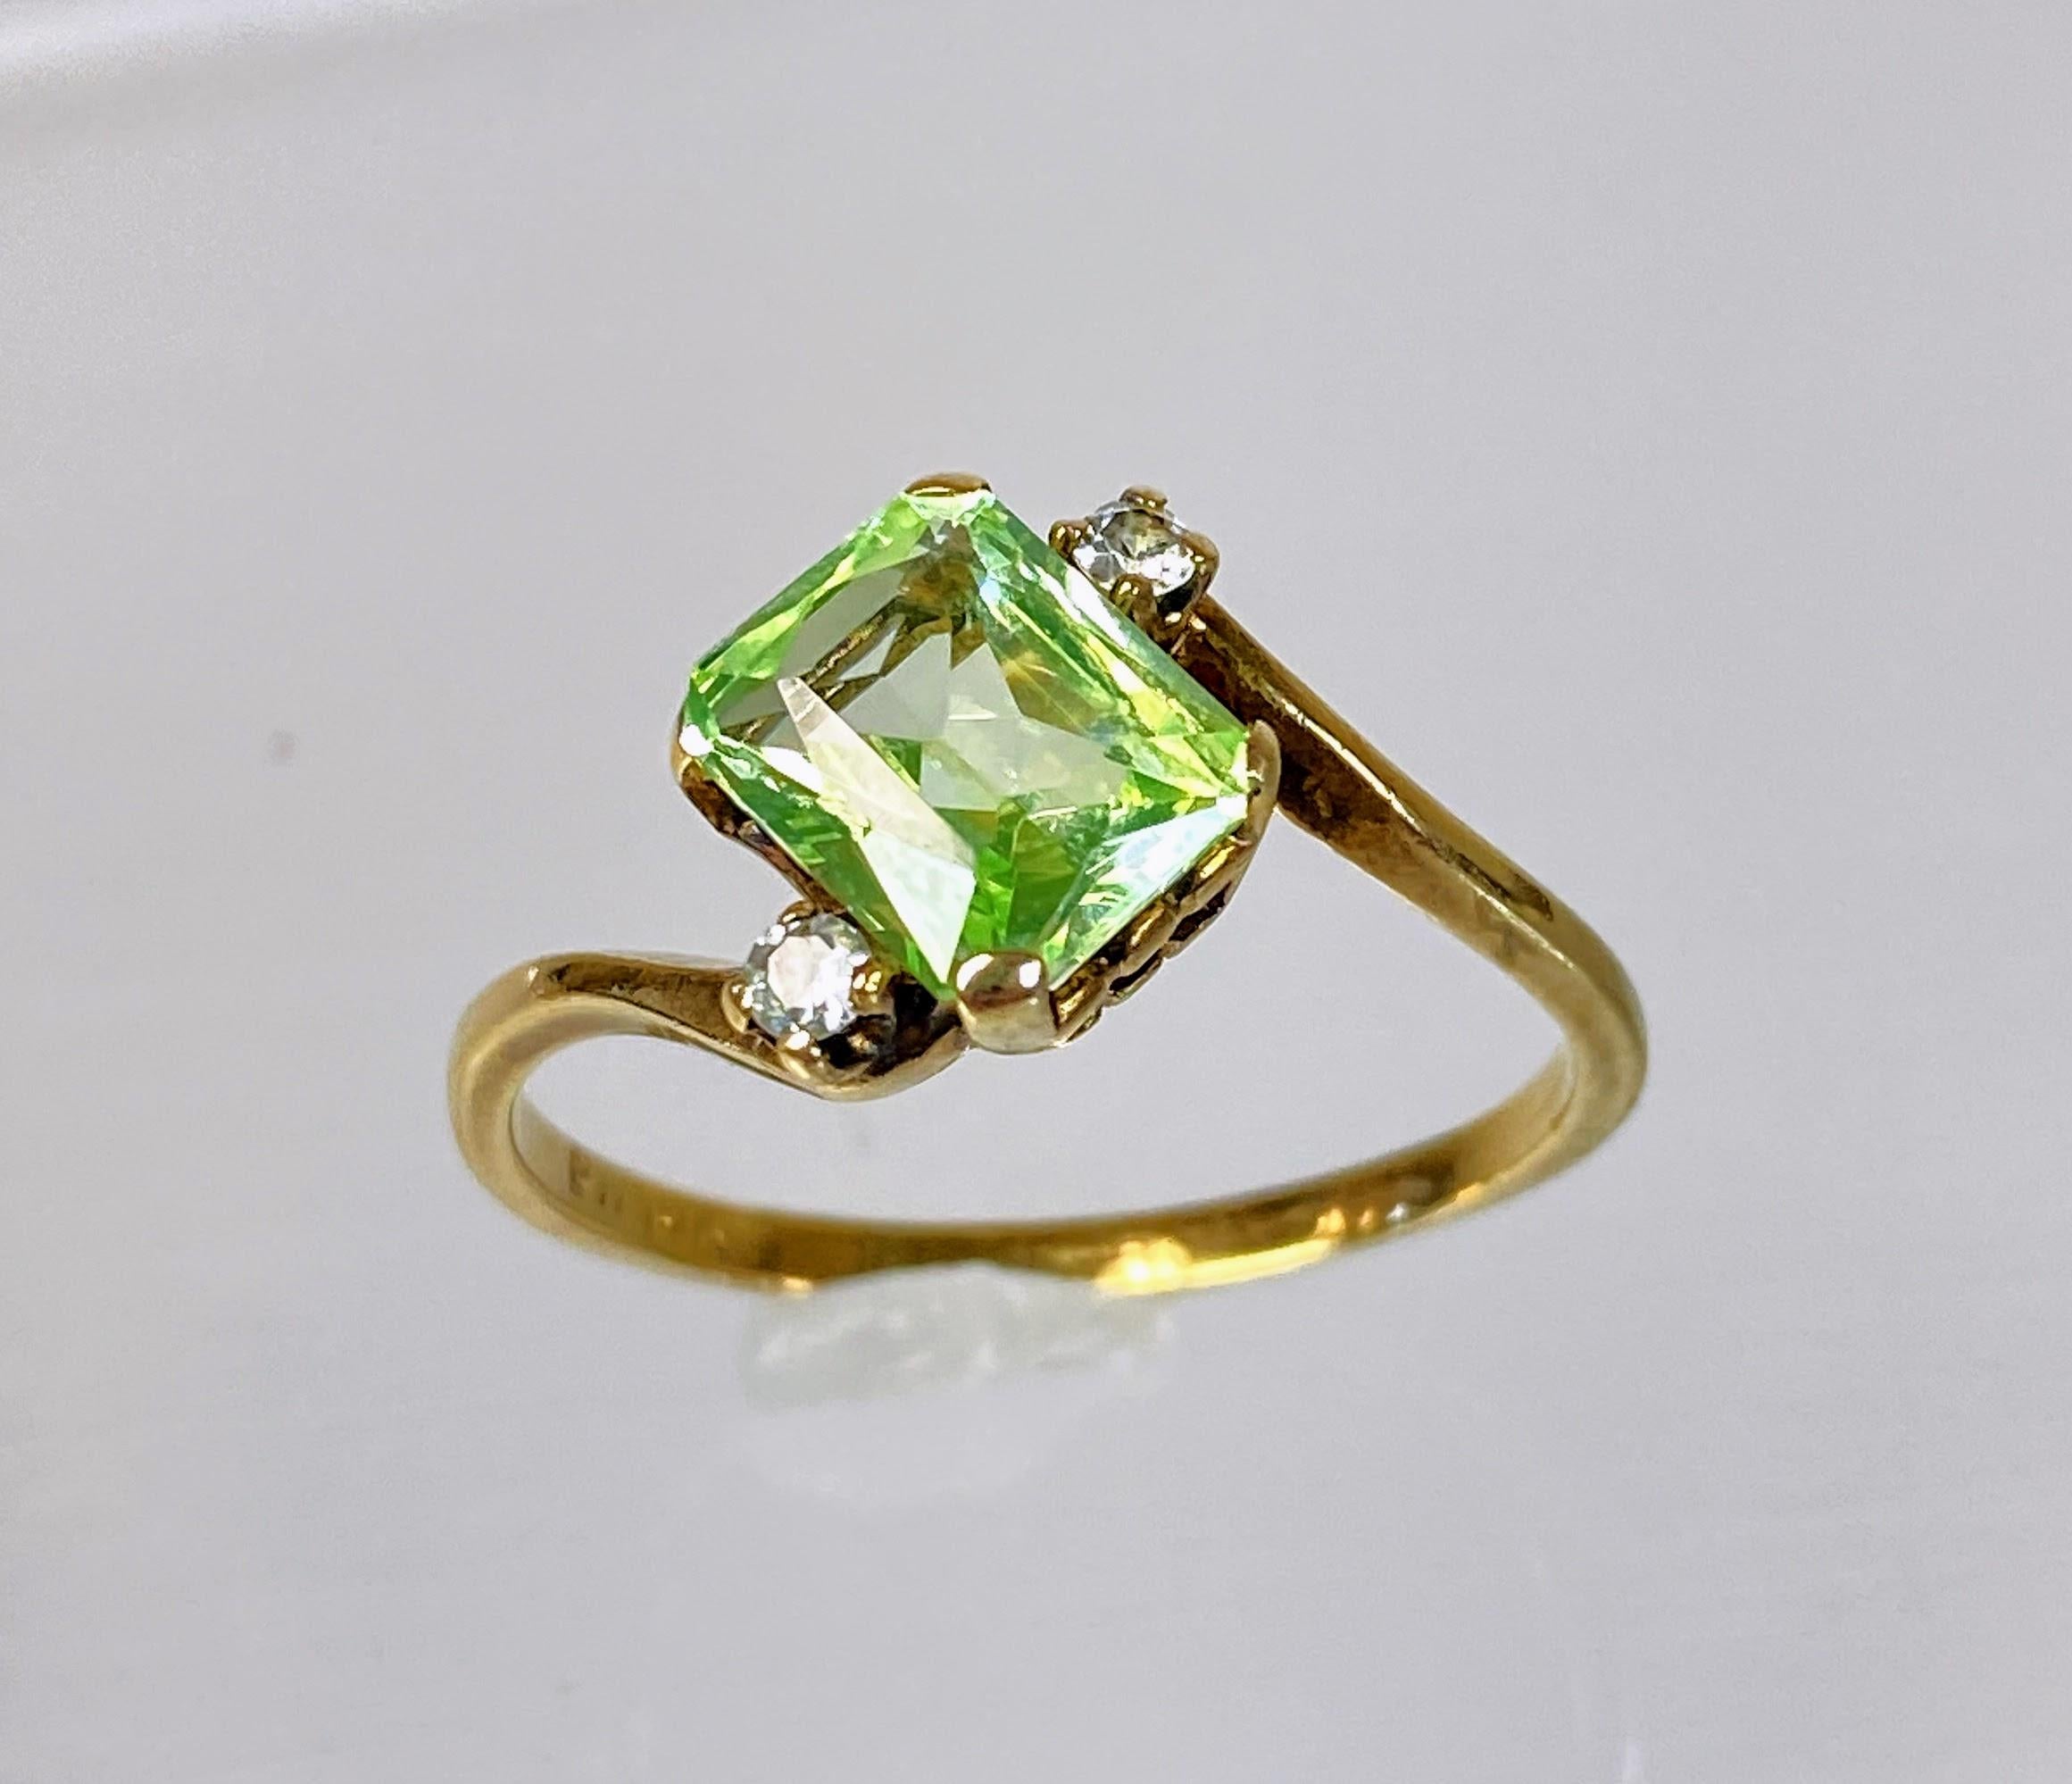 At first glance, this piece looks as if it must be made of uranium glance. Upon closer examination, the retro and funky green glows just a bit differently. 

This vintage-inspired solitaire ring exudes timeless elegance with its classic design,